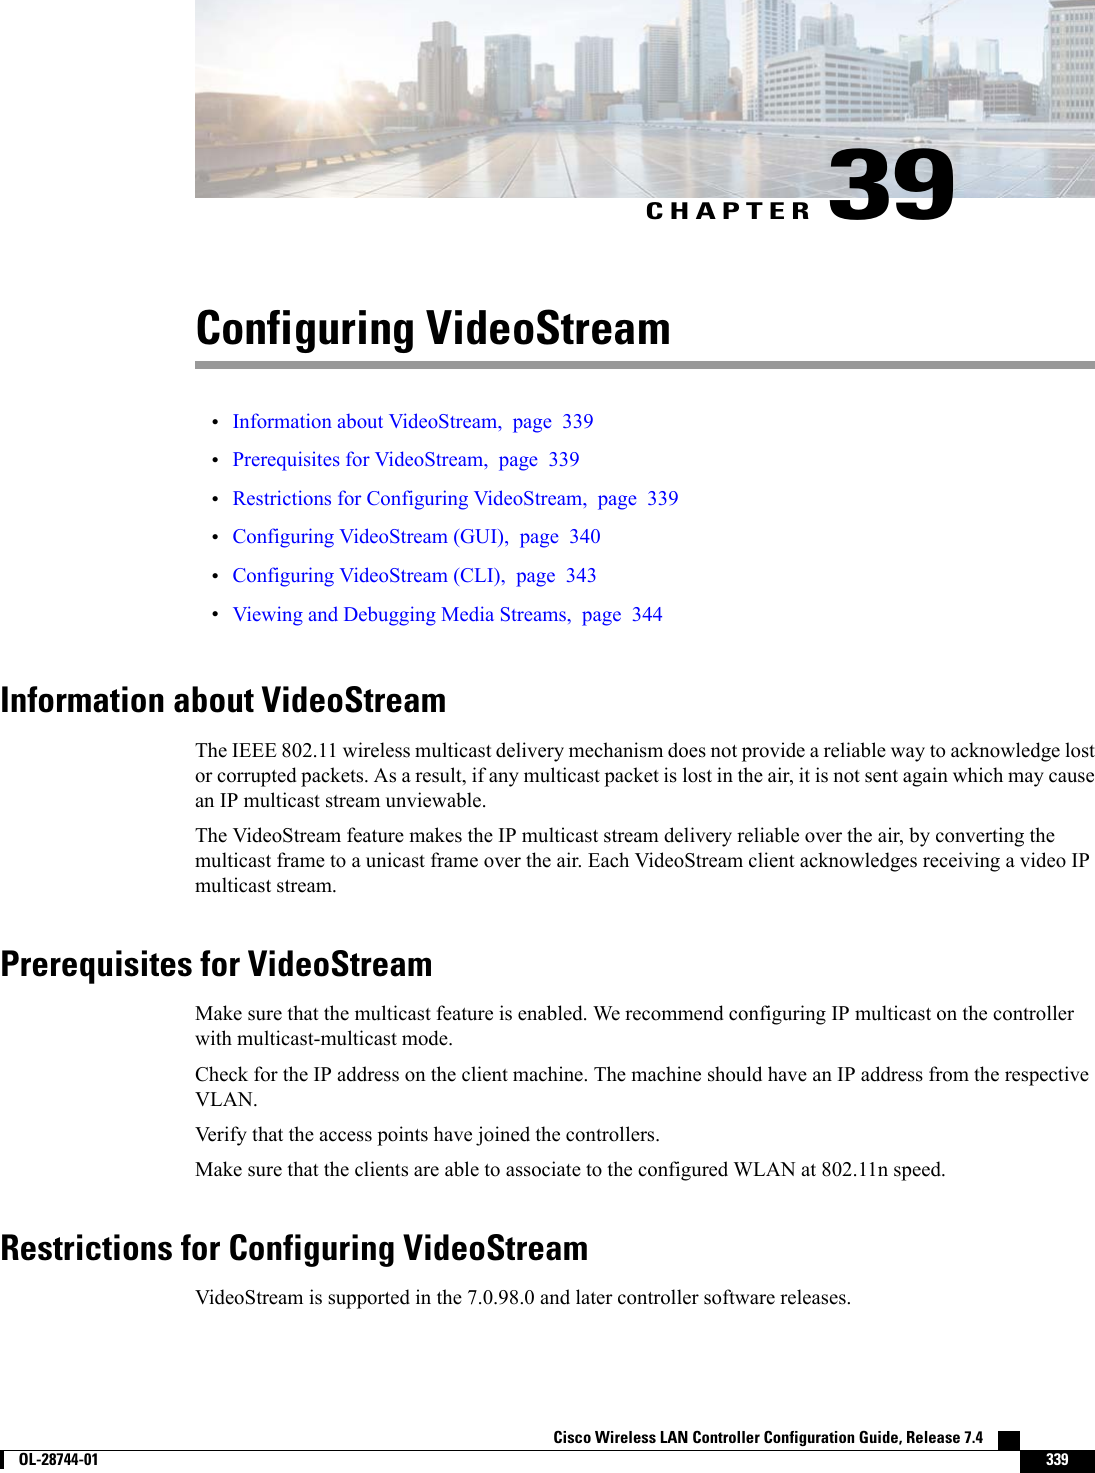 CHAPTER 39Configuring VideoStream•Information about VideoStream, page 339•Prerequisites for VideoStream, page 339•Restrictions for Configuring VideoStream, page 339•Configuring VideoStream (GUI), page 340•Configuring VideoStream (CLI), page 343•Viewing and Debugging Media Streams, page 344Information about VideoStreamThe IEEE 802.11 wireless multicast delivery mechanism does not provide a reliable way to acknowledge lostor corrupted packets. As a result, if any multicast packet is lost in the air, it is not sent again which may causean IP multicast stream unviewable.The VideoStream feature makes the IP multicast stream delivery reliable over the air, by converting themulticast frame to a unicast frame over the air. Each VideoStream client acknowledges receiving a video IPmulticast stream.Prerequisites for VideoStreamMake sure that the multicast feature is enabled. We recommend configuring IP multicast on the controllerwith multicast-multicast mode.Check for the IP address on the client machine. The machine should have an IP address from the respectiveVLAN.Verify that the access points have joined the controllers.Make sure that the clients are able to associate to the configured WLAN at 802.11n speed.Restrictions for Configuring VideoStreamVideoStream is supported in the 7.0.98.0 and later controller software releases.Cisco Wireless LAN Controller Configuration Guide, Release 7.4        OL-28744-01 339